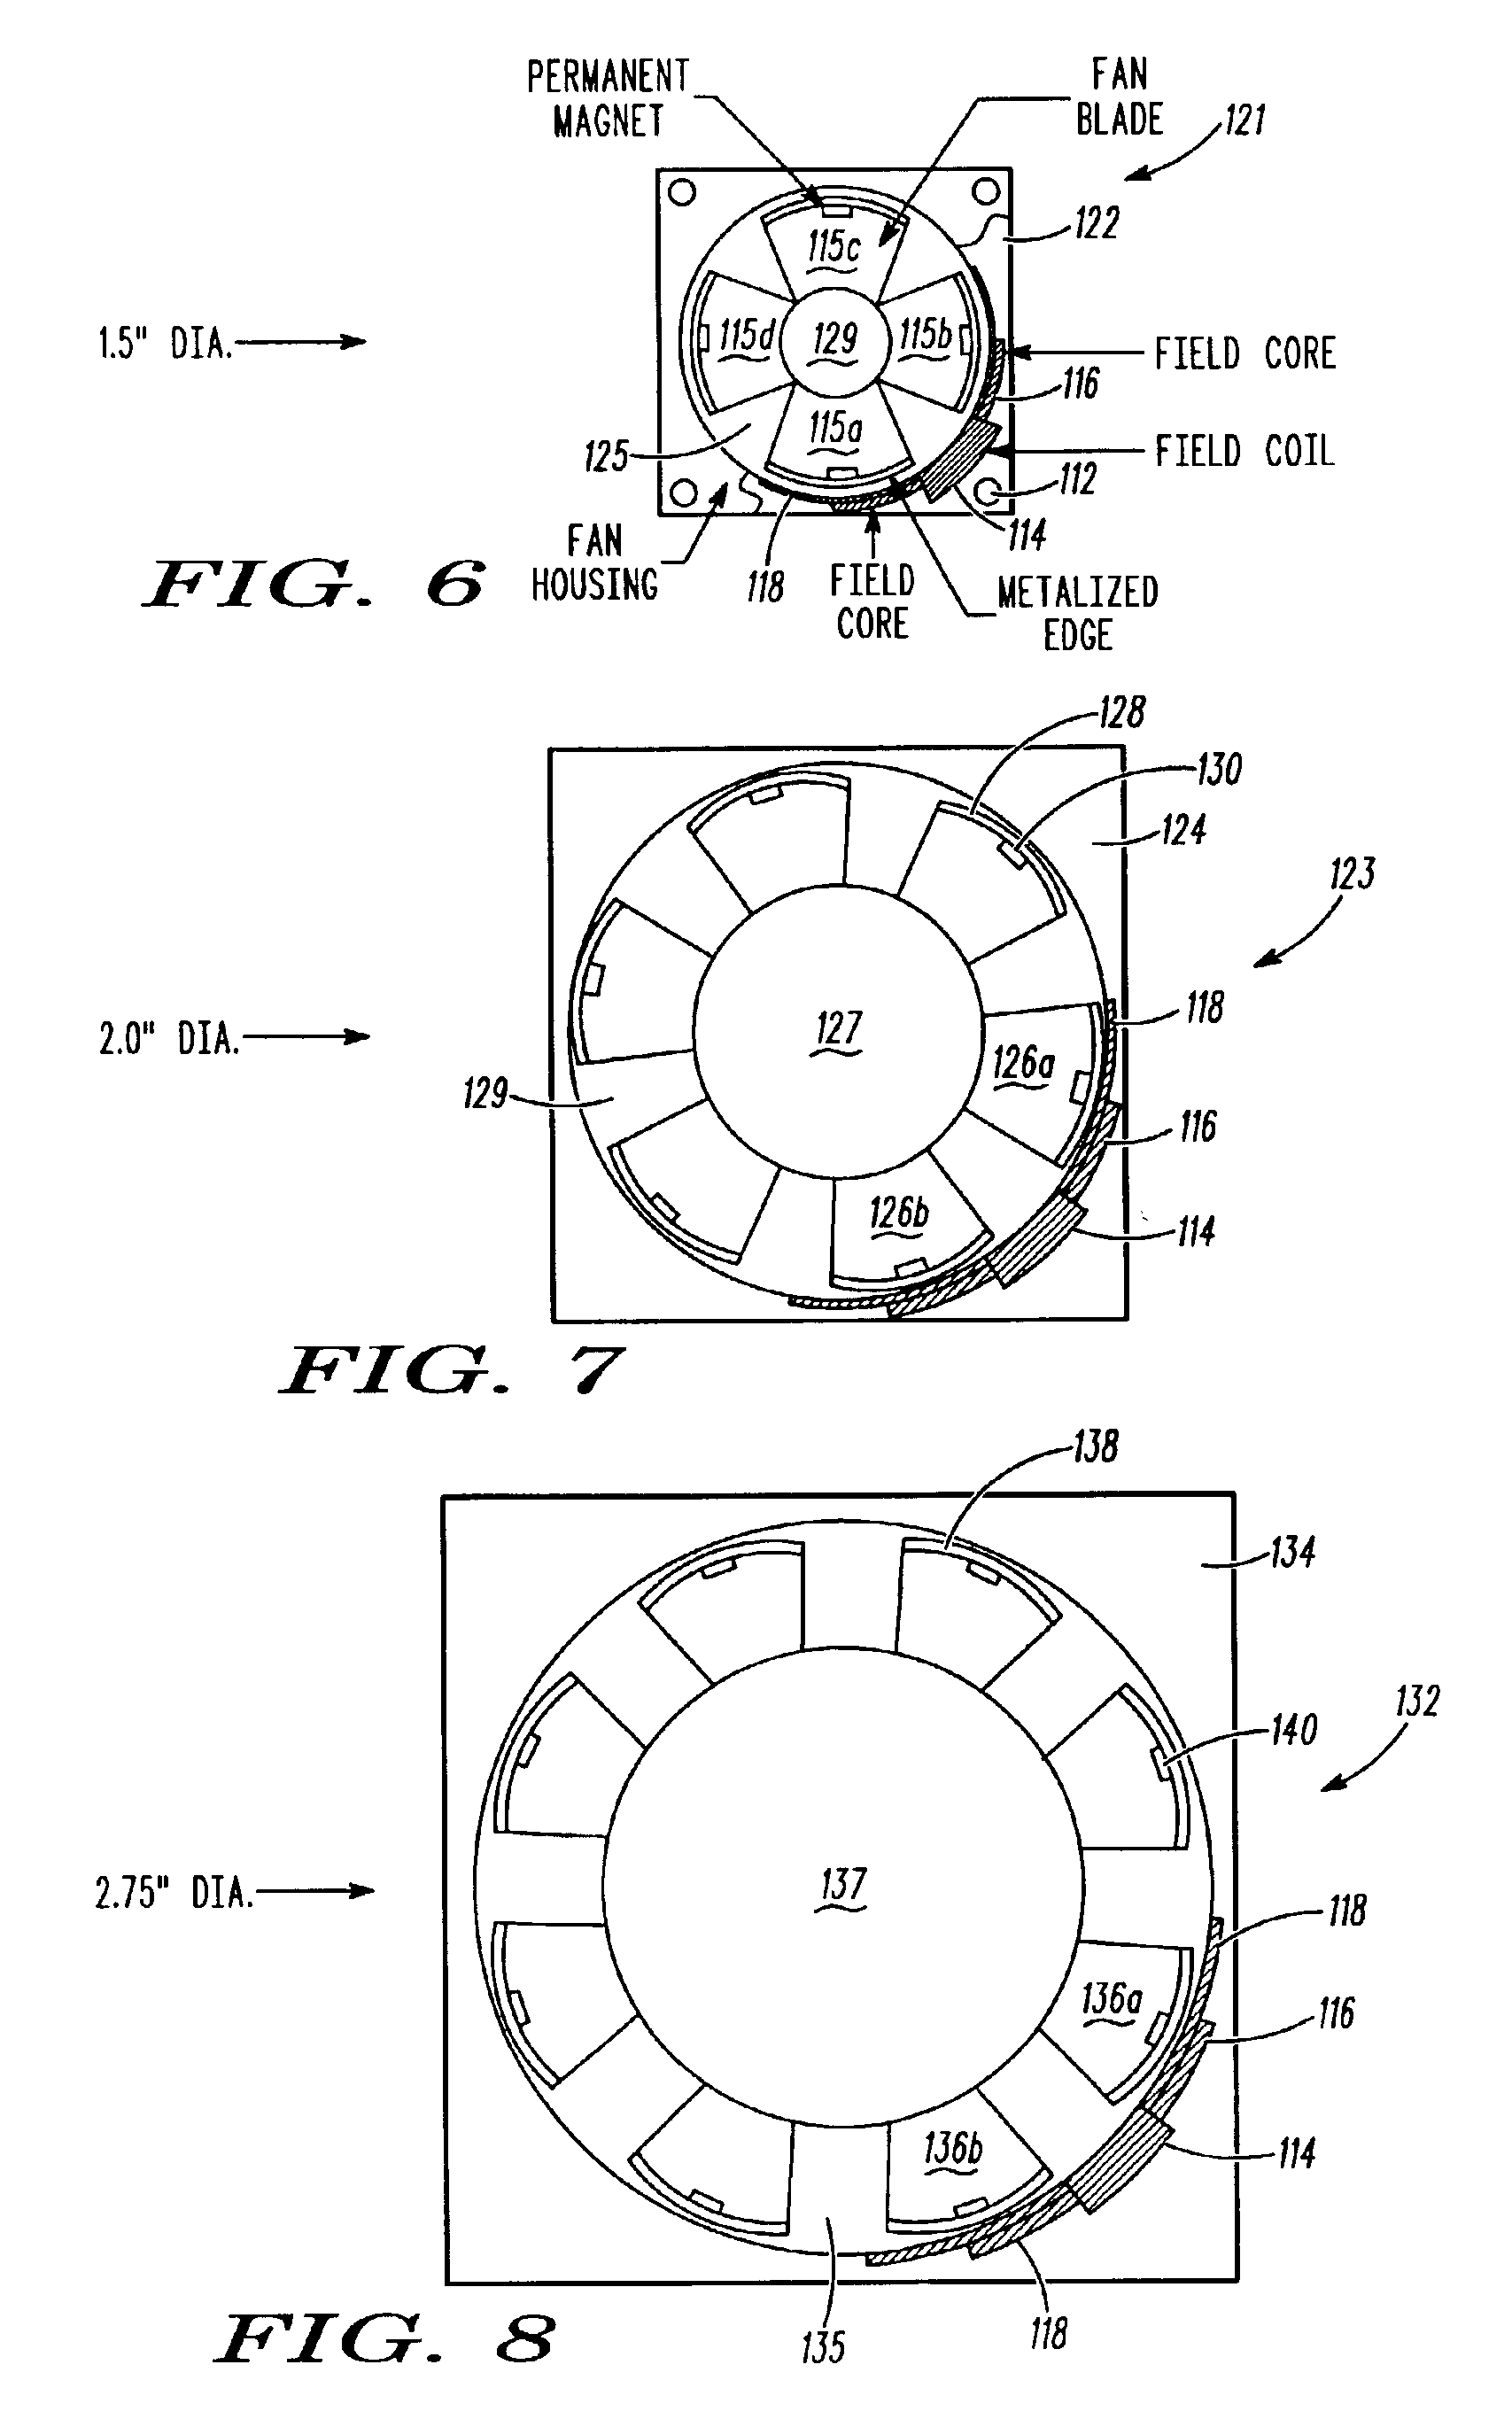 Magnetically driven air moving apparatus, with magnetically tipped fan blades and a single field coil and core